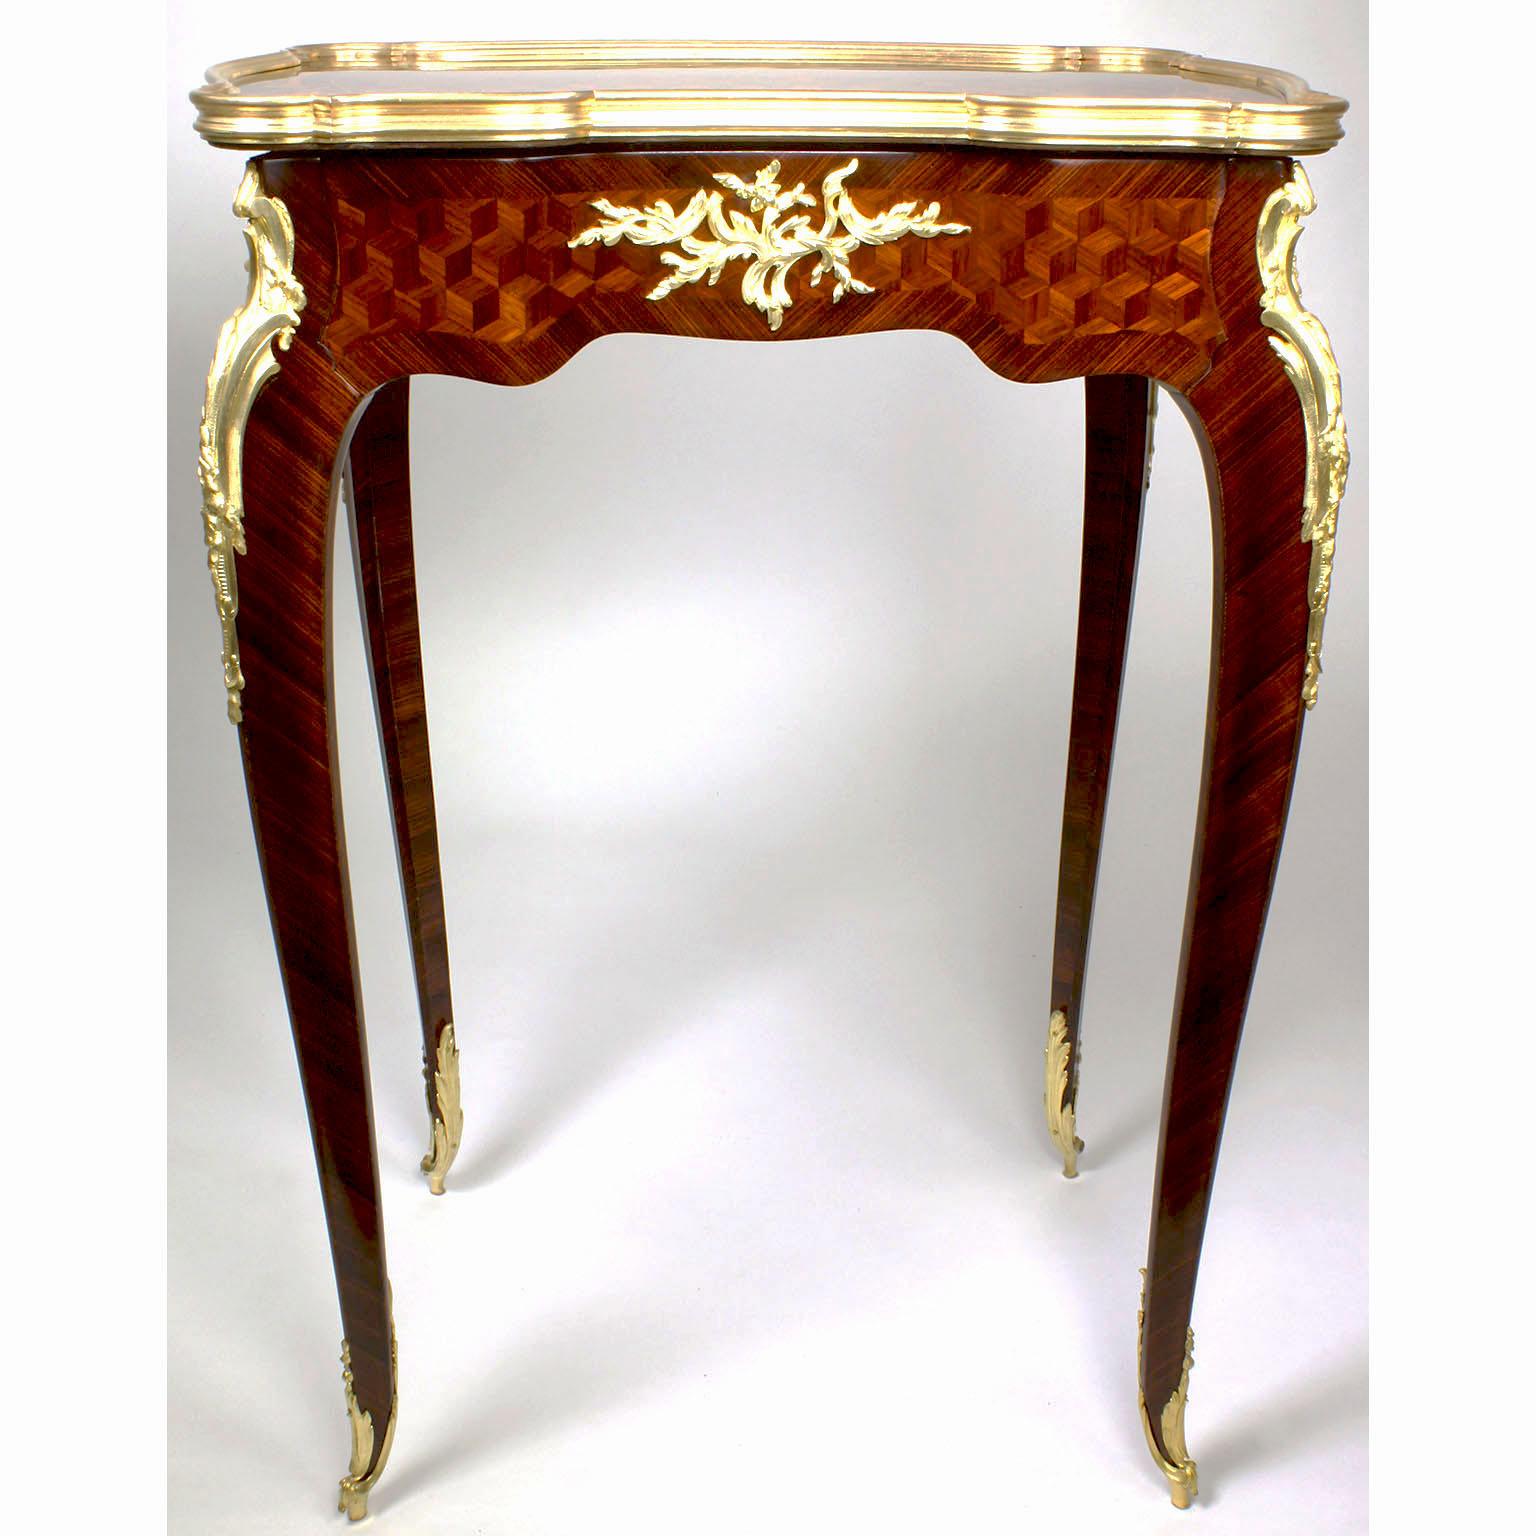 Early 20th Century Fine French Louis XV Style Ormolu Mounted Marquetry Side-Table by François Linke For Sale